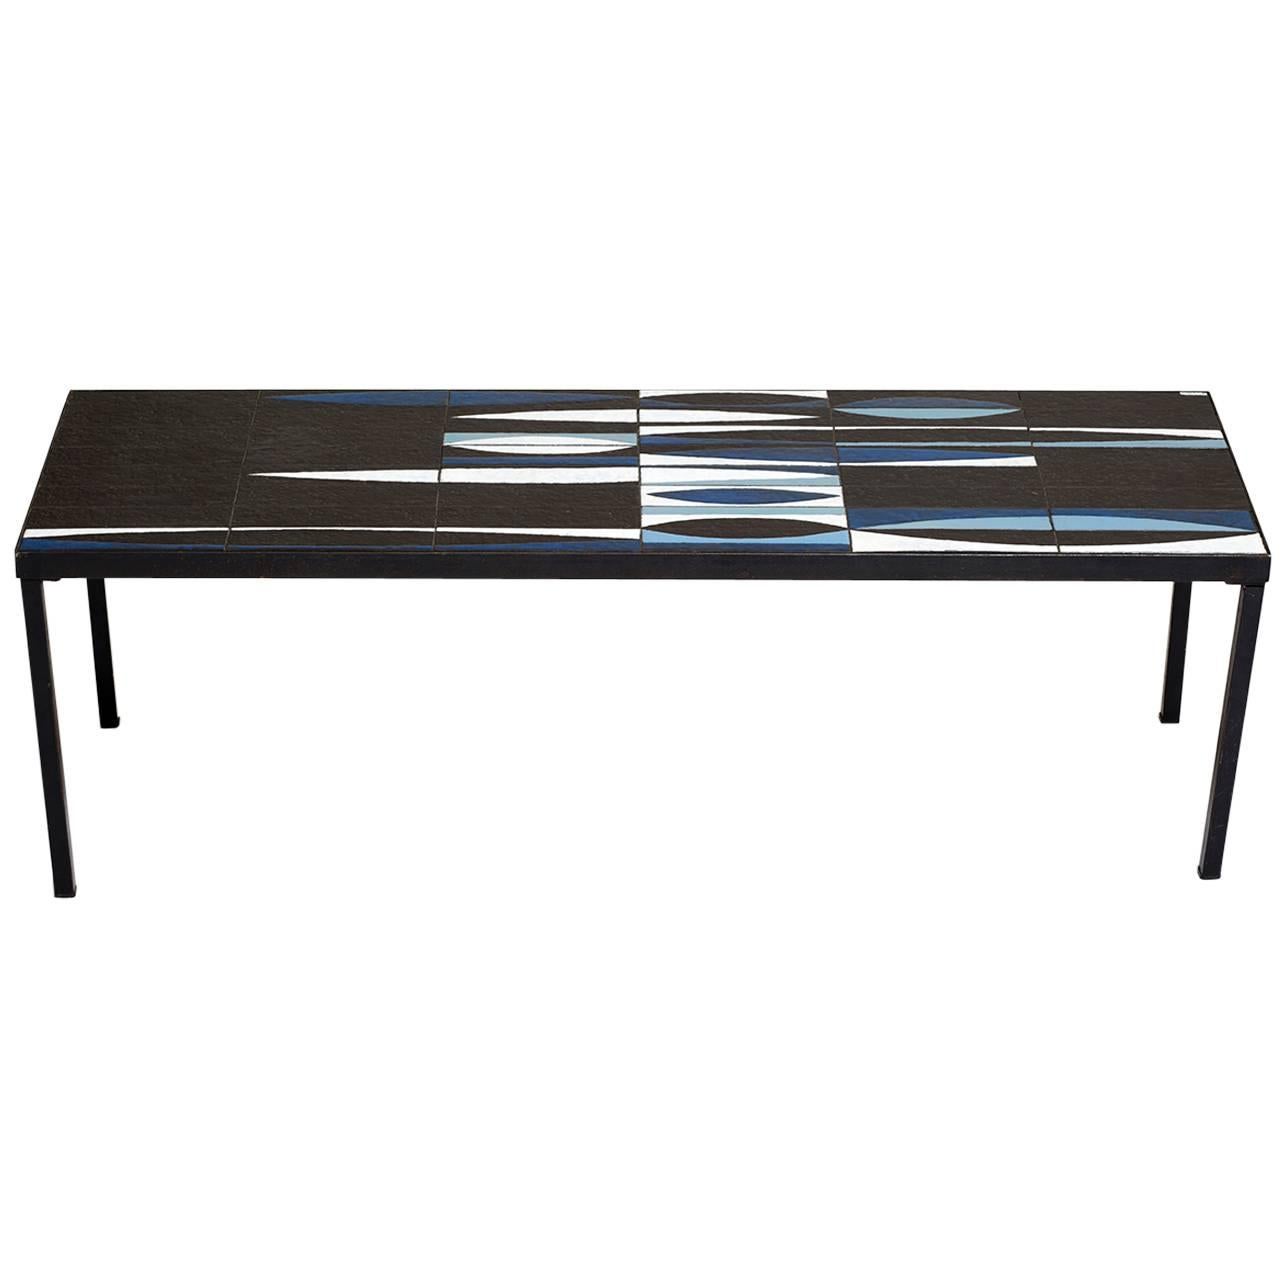 Capron Blue Black  Ceramic Navette Coffee Table, Iron 1950 France Mid Century

Very Rare blue Roger Capron Navette ceramic table
signed by Artist. This must have been a custom order as it is very rare to find this color